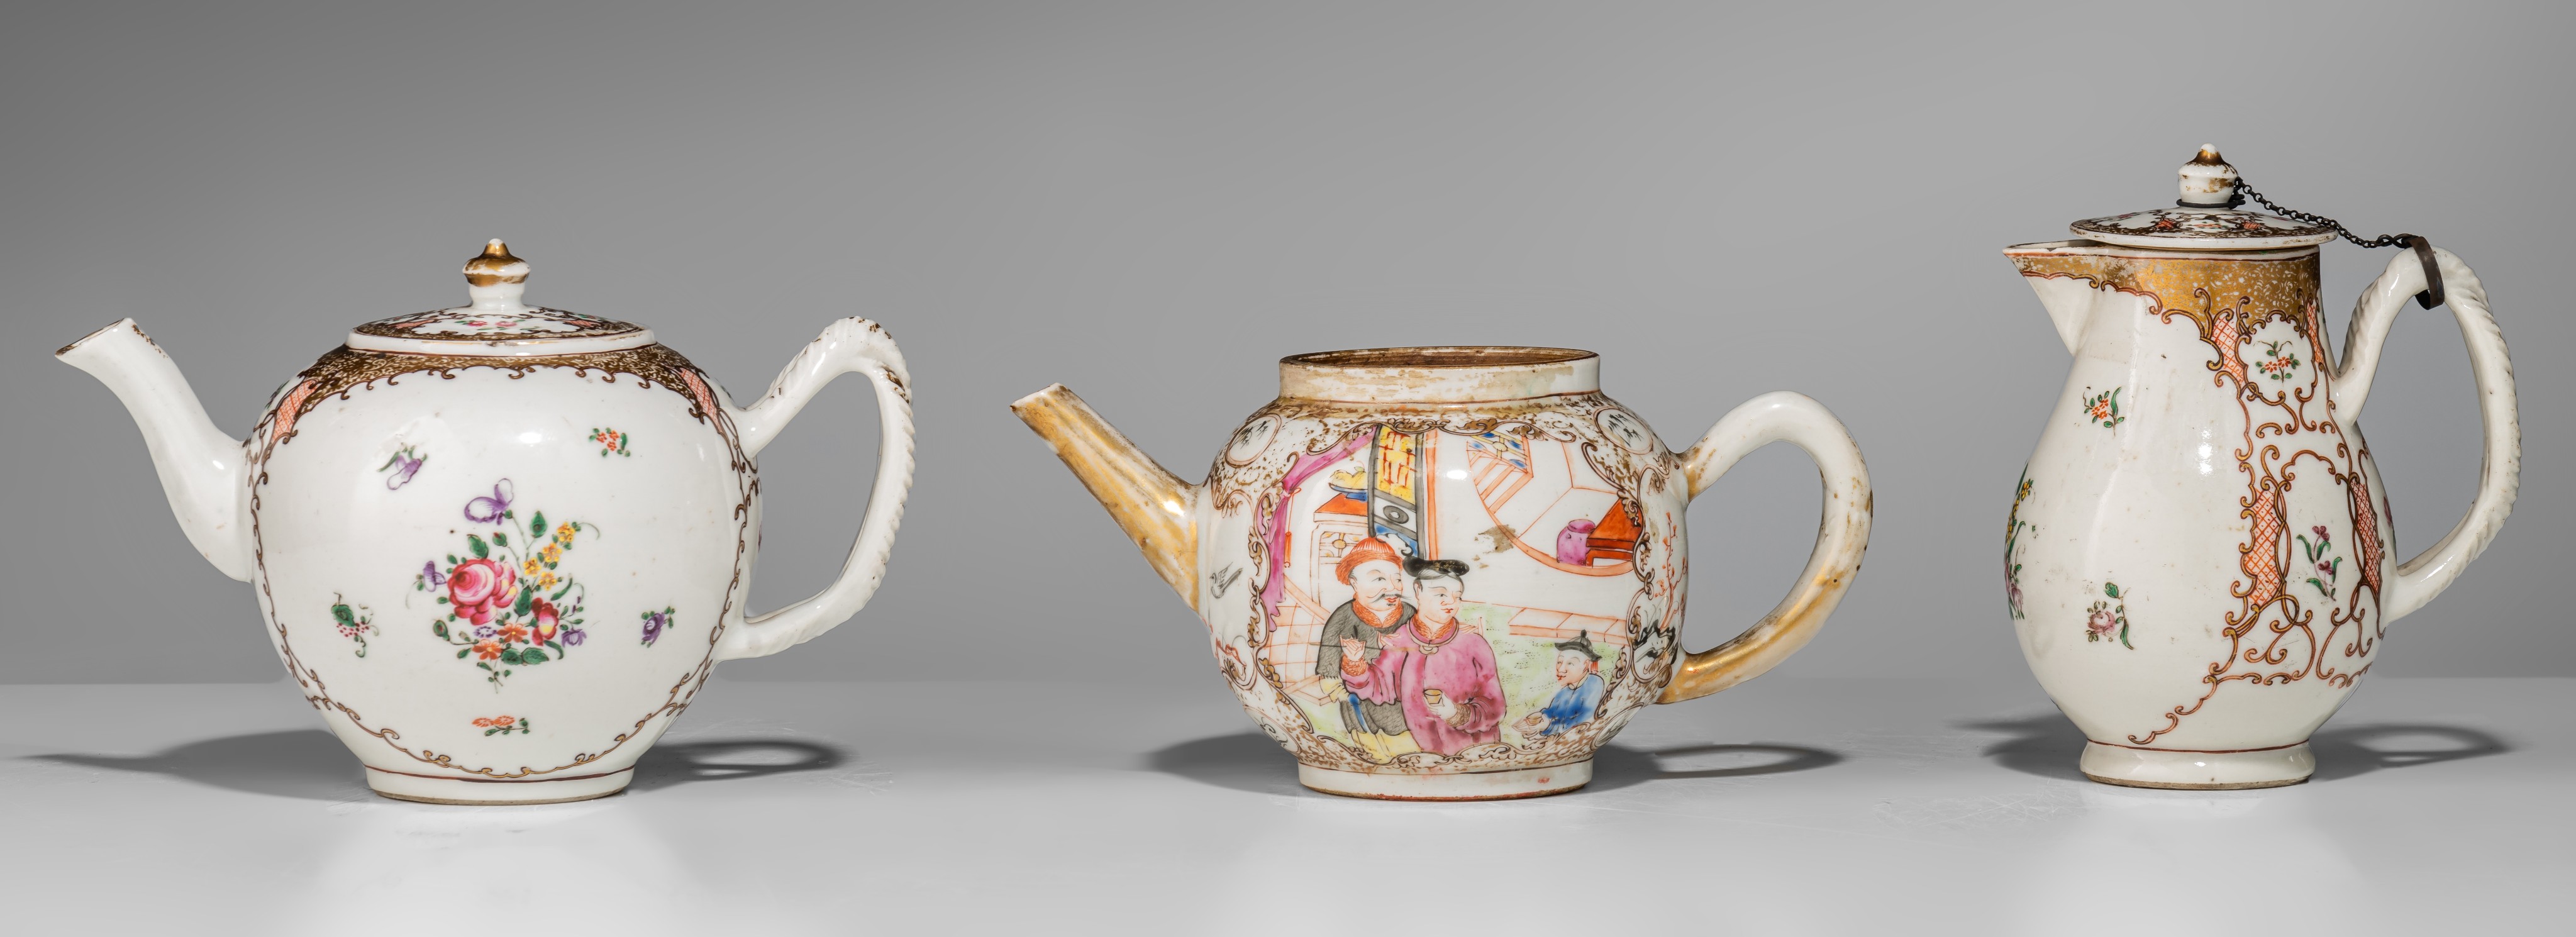 A collection of famille rose and gilt decorated export porcelain ware, 18thC, largest - H 12,5 - 34, - Image 4 of 20